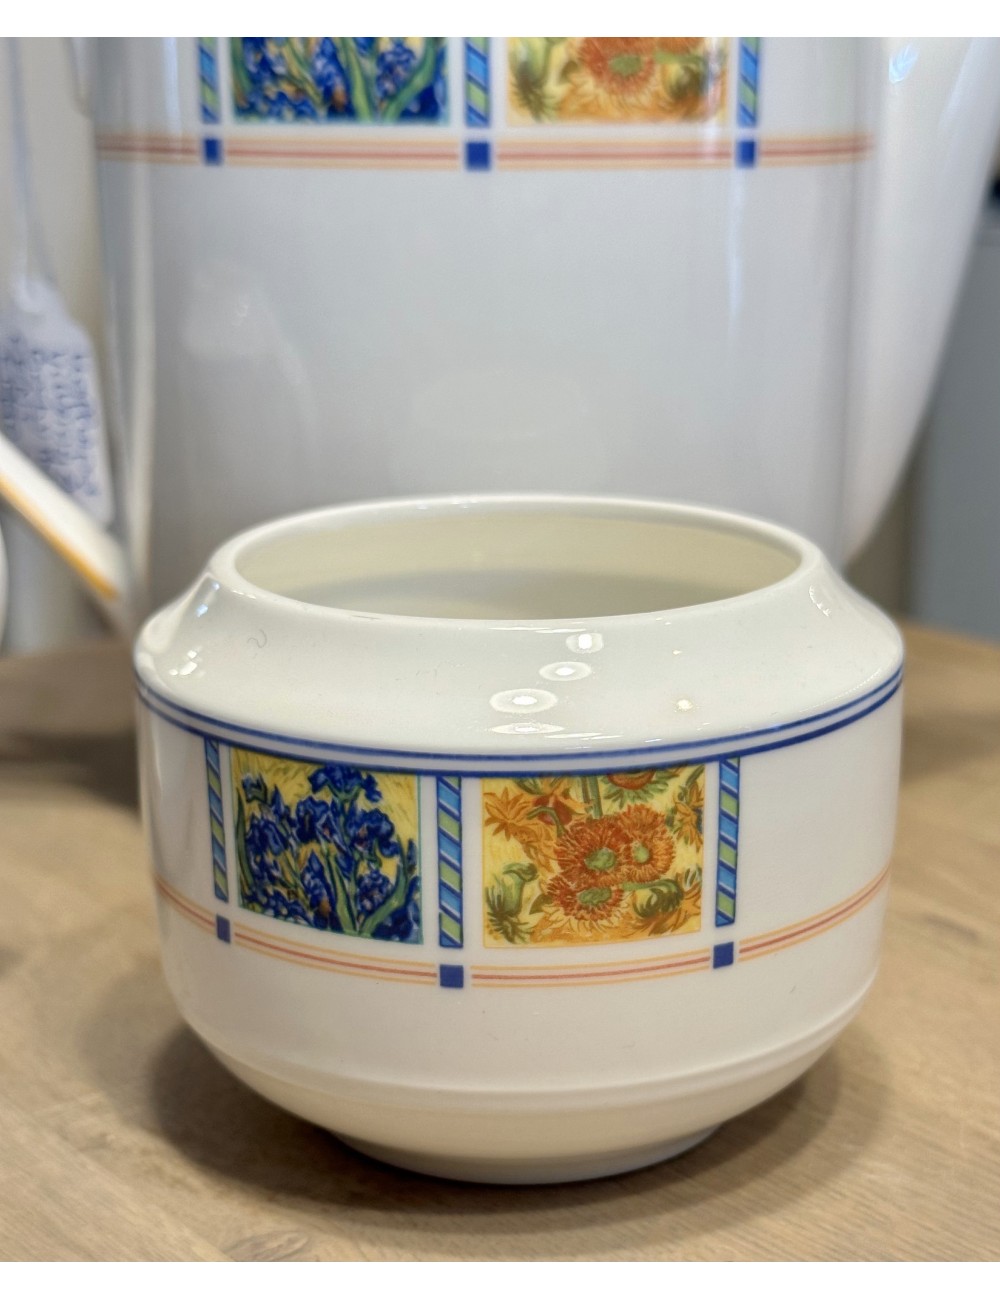 Sugar bowl (without lid) - Villeroy & Boch - décor VINCENT 1890-1990 - specially made for Douwe Egberts